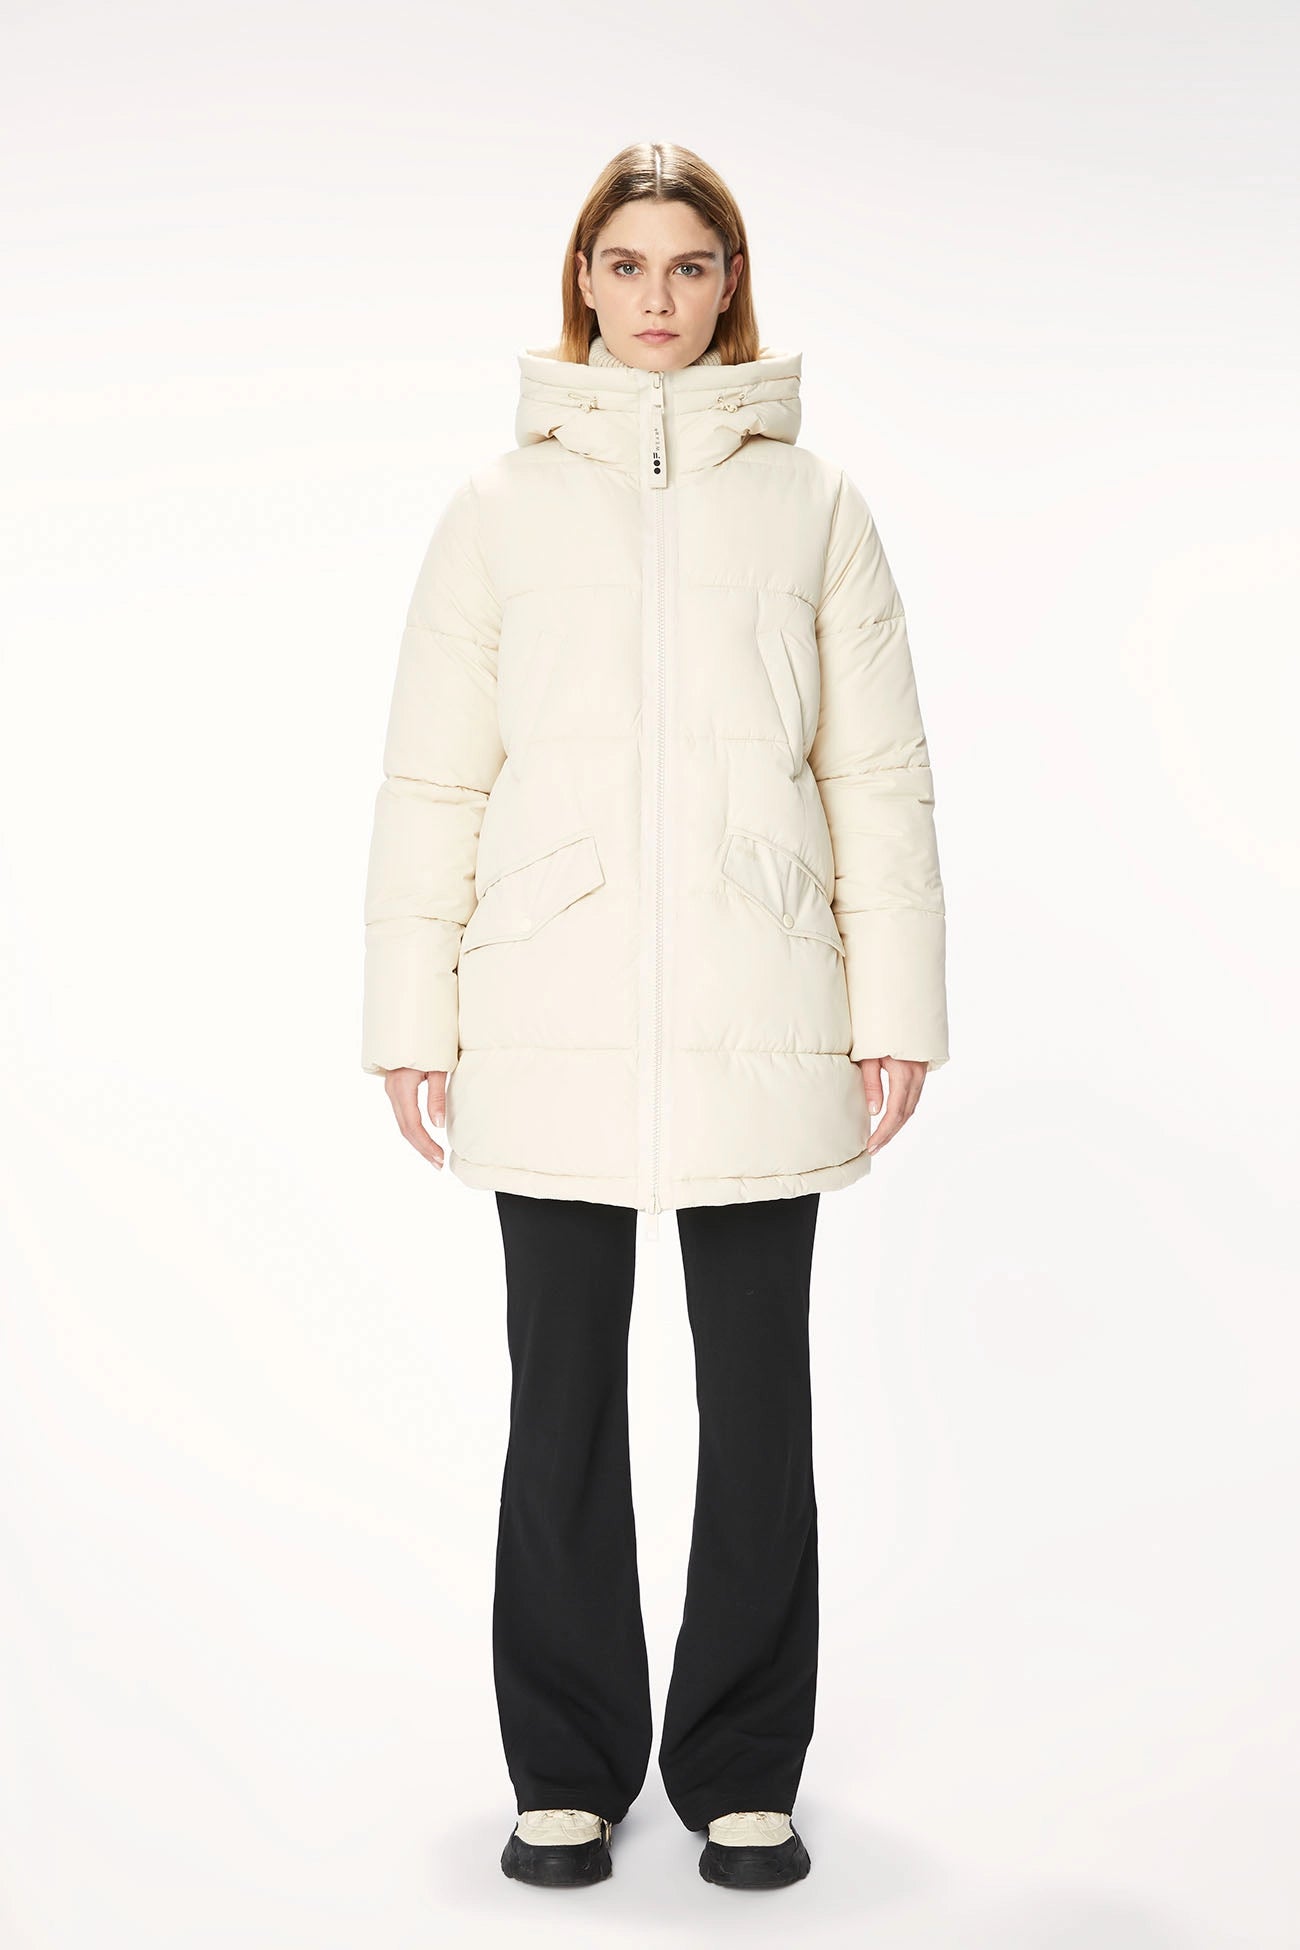 A woman, wearing an OOF Jacket 9098 - Water-Resistant Nylon - Cream, featuring an adjustable drawstring bottom hem for a generous fit.